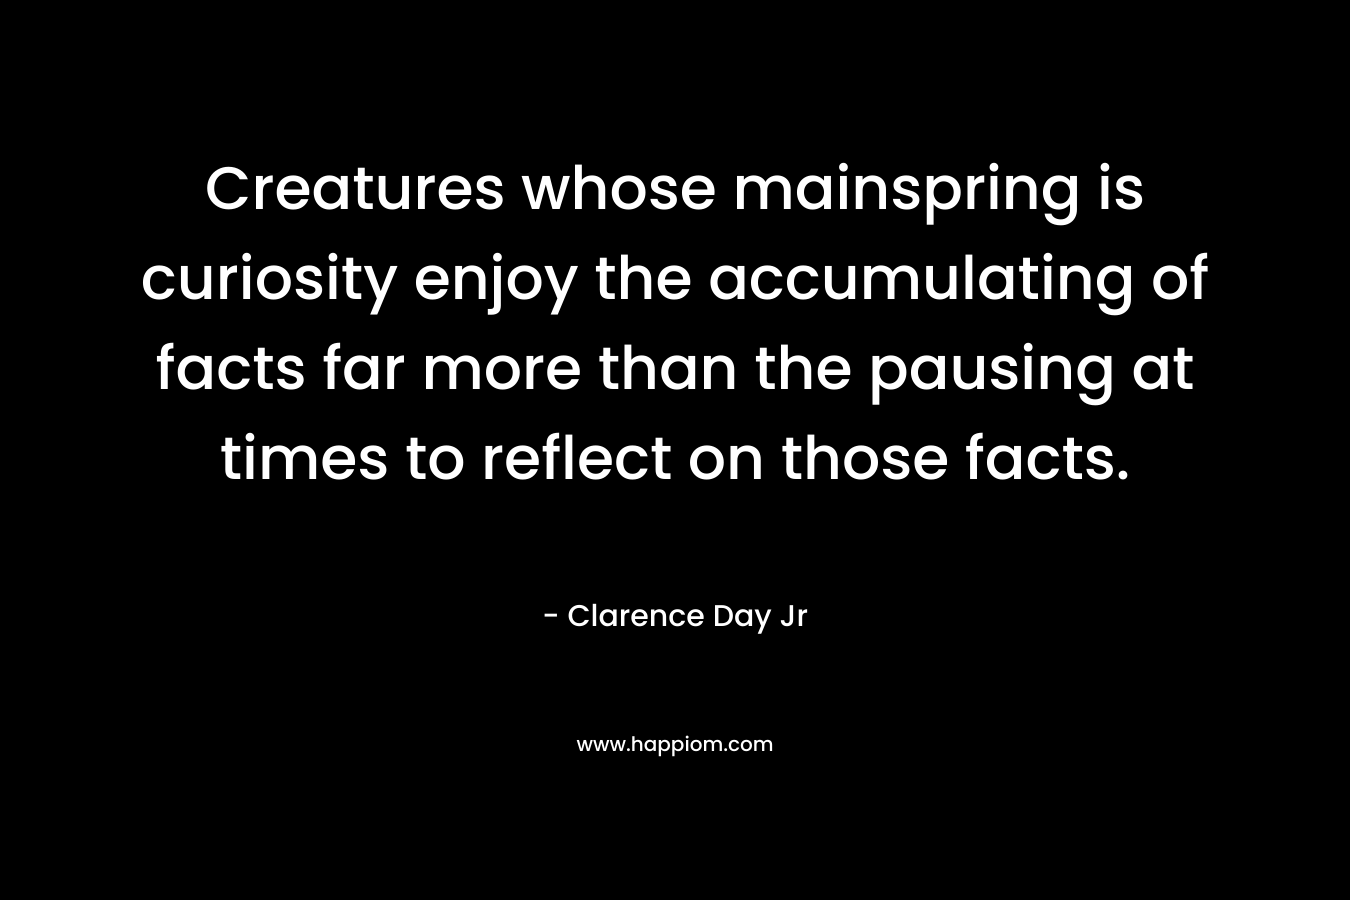 Creatures whose mainspring is curiosity enjoy the accumulating of facts far more than the pausing at times to reflect on those facts. – Clarence Day Jr